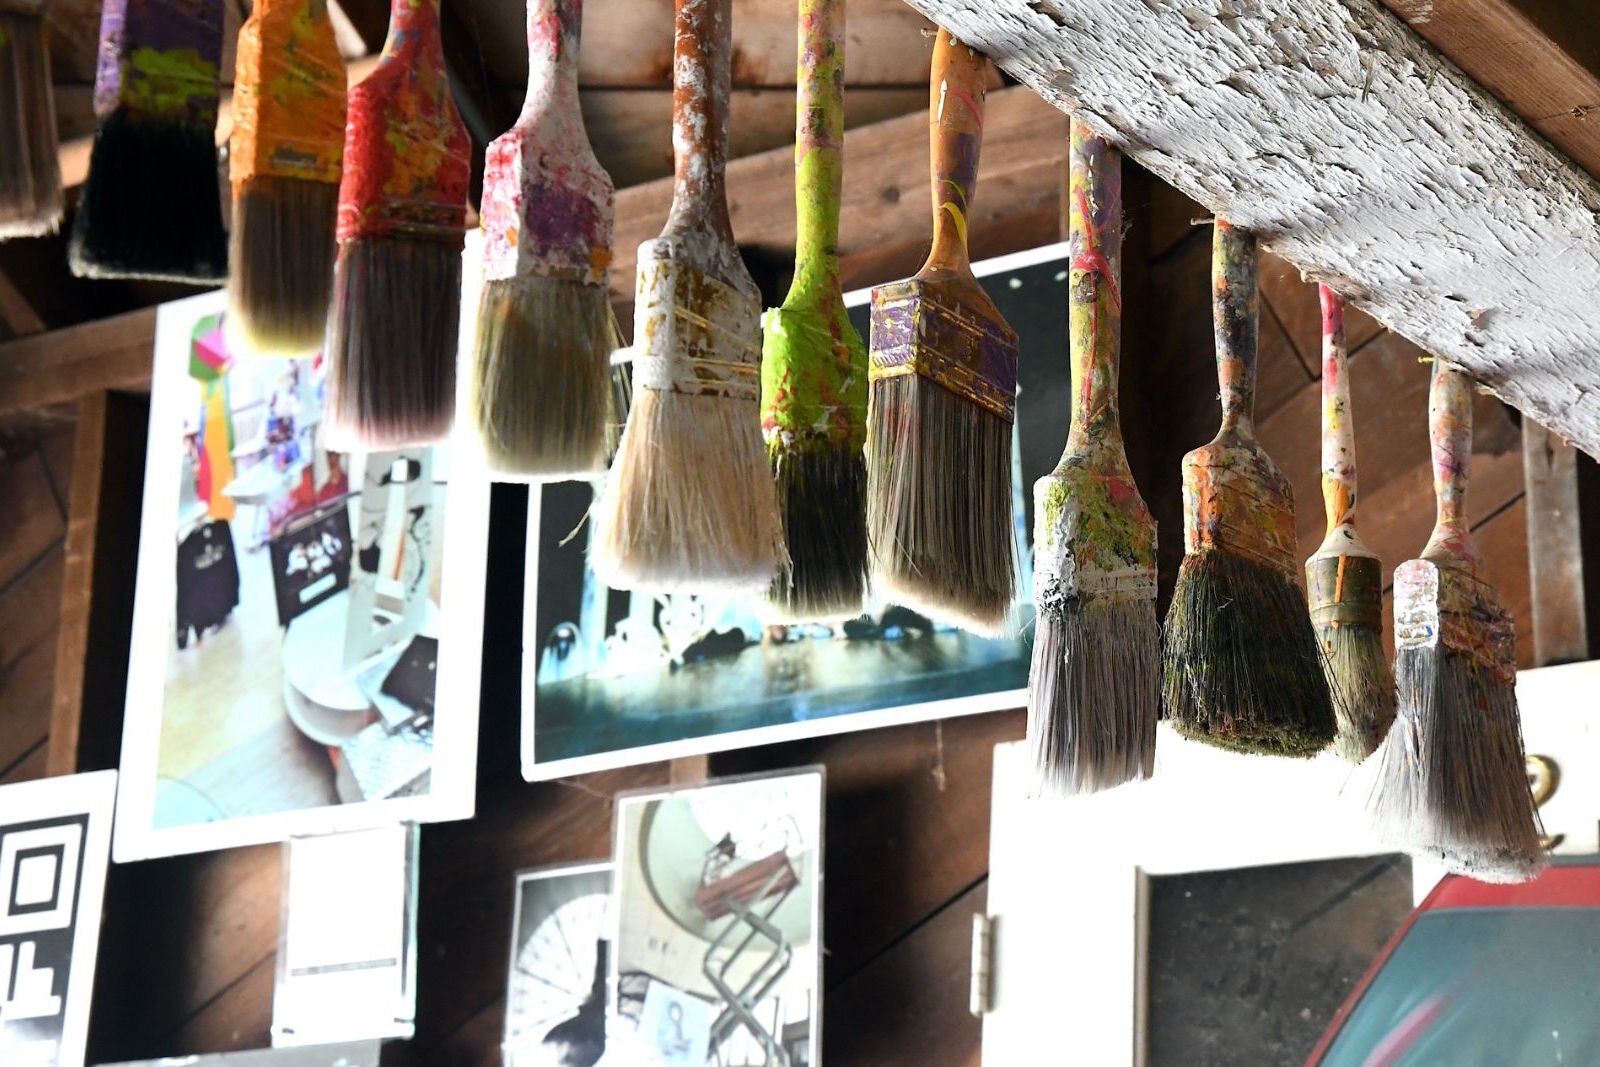 Some of Andrew Freemire’s paint brushes in his garage